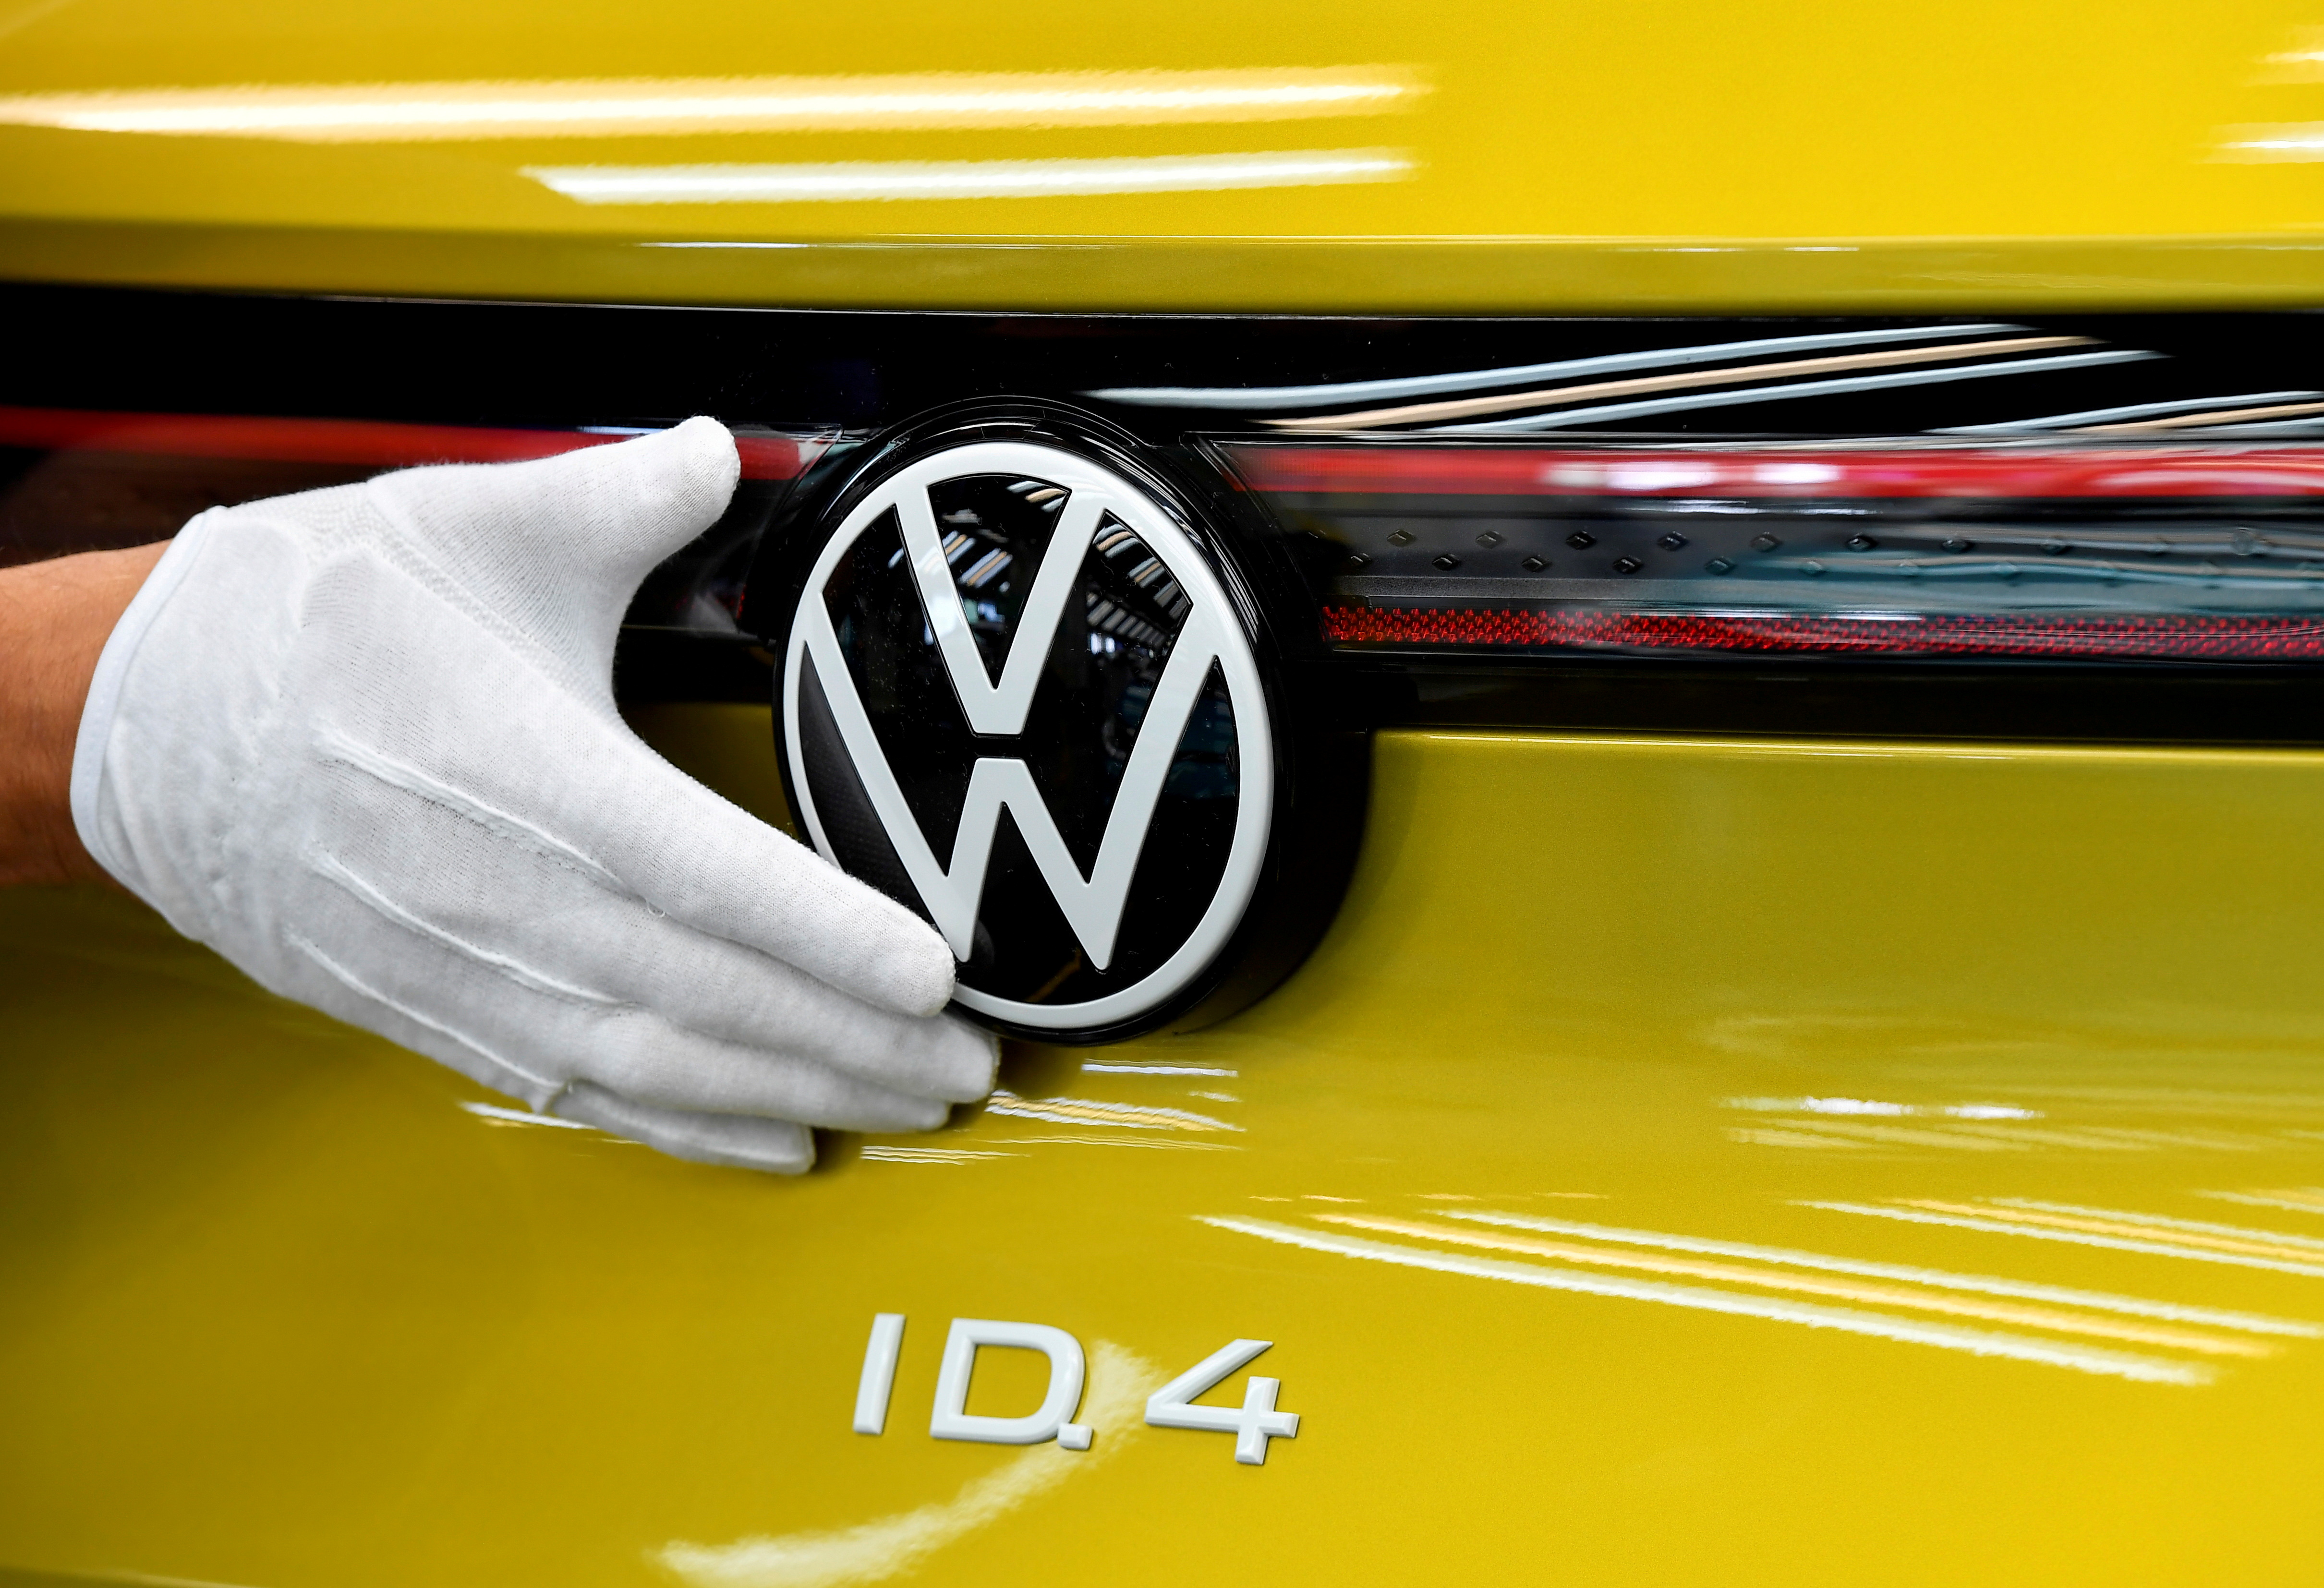 VW shows electric SUV ID 4 during a photo workshop